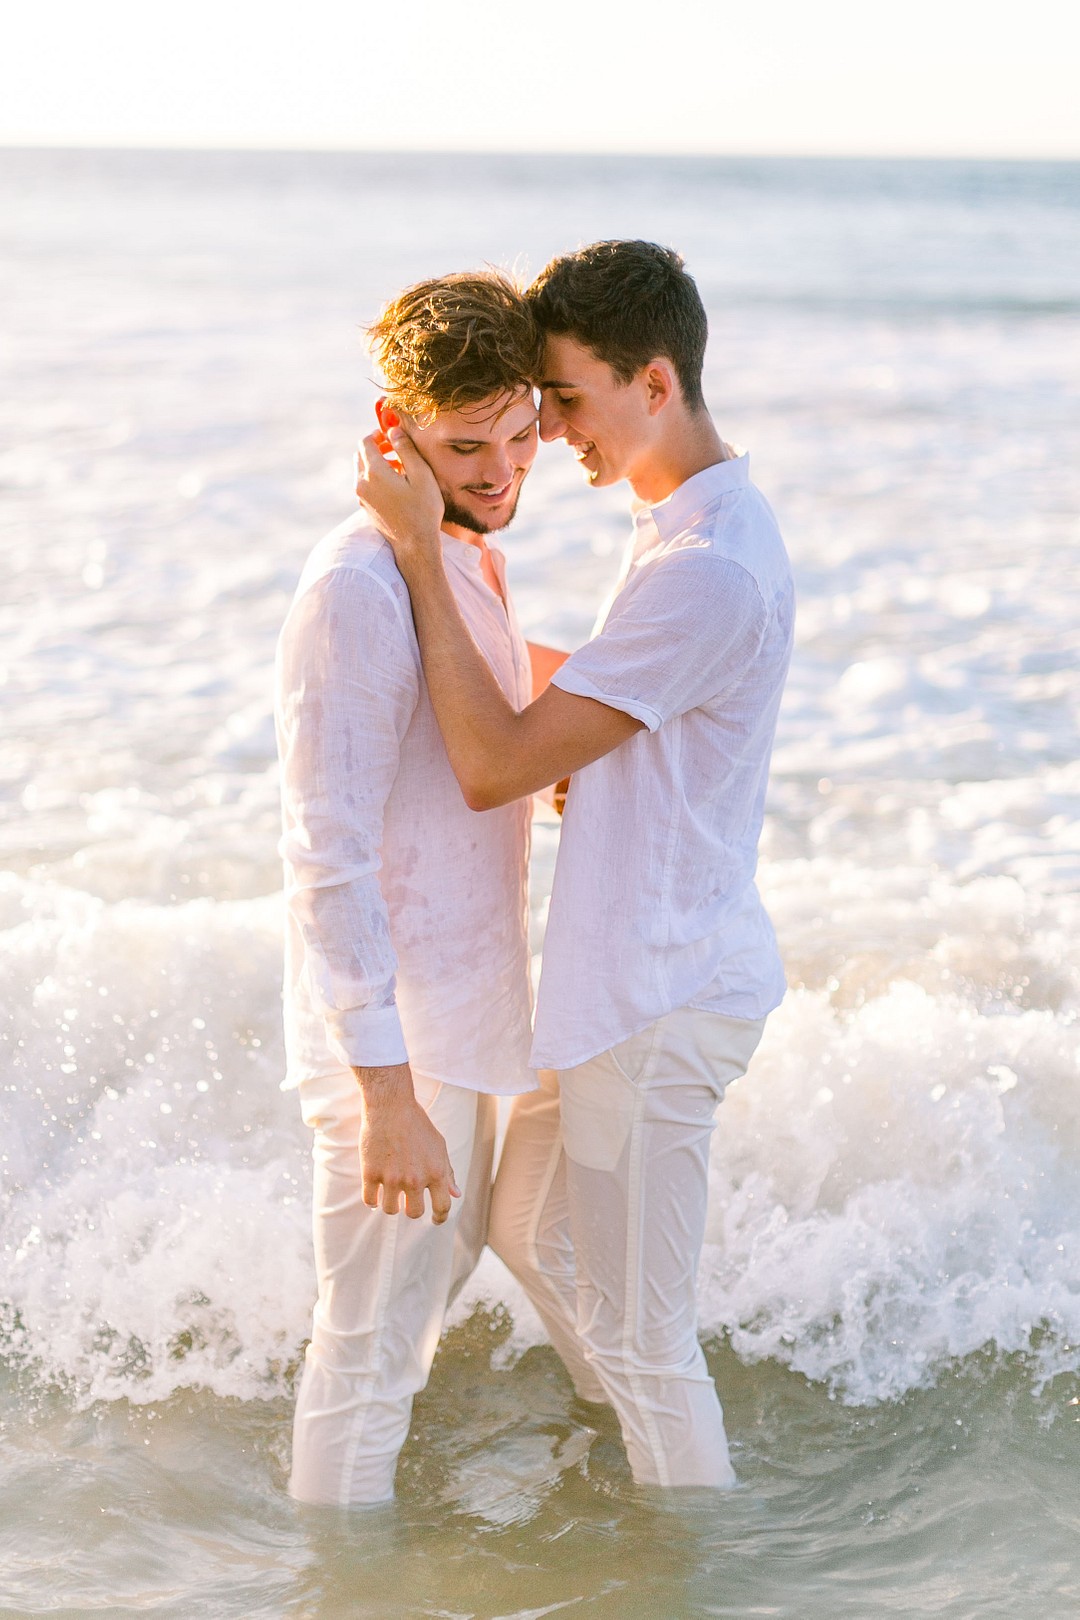 Romantic engagement photos on the beach in Kauai, Hawaii LGBTQ+ weddings engaged two grooms gay engagement photos water ocean